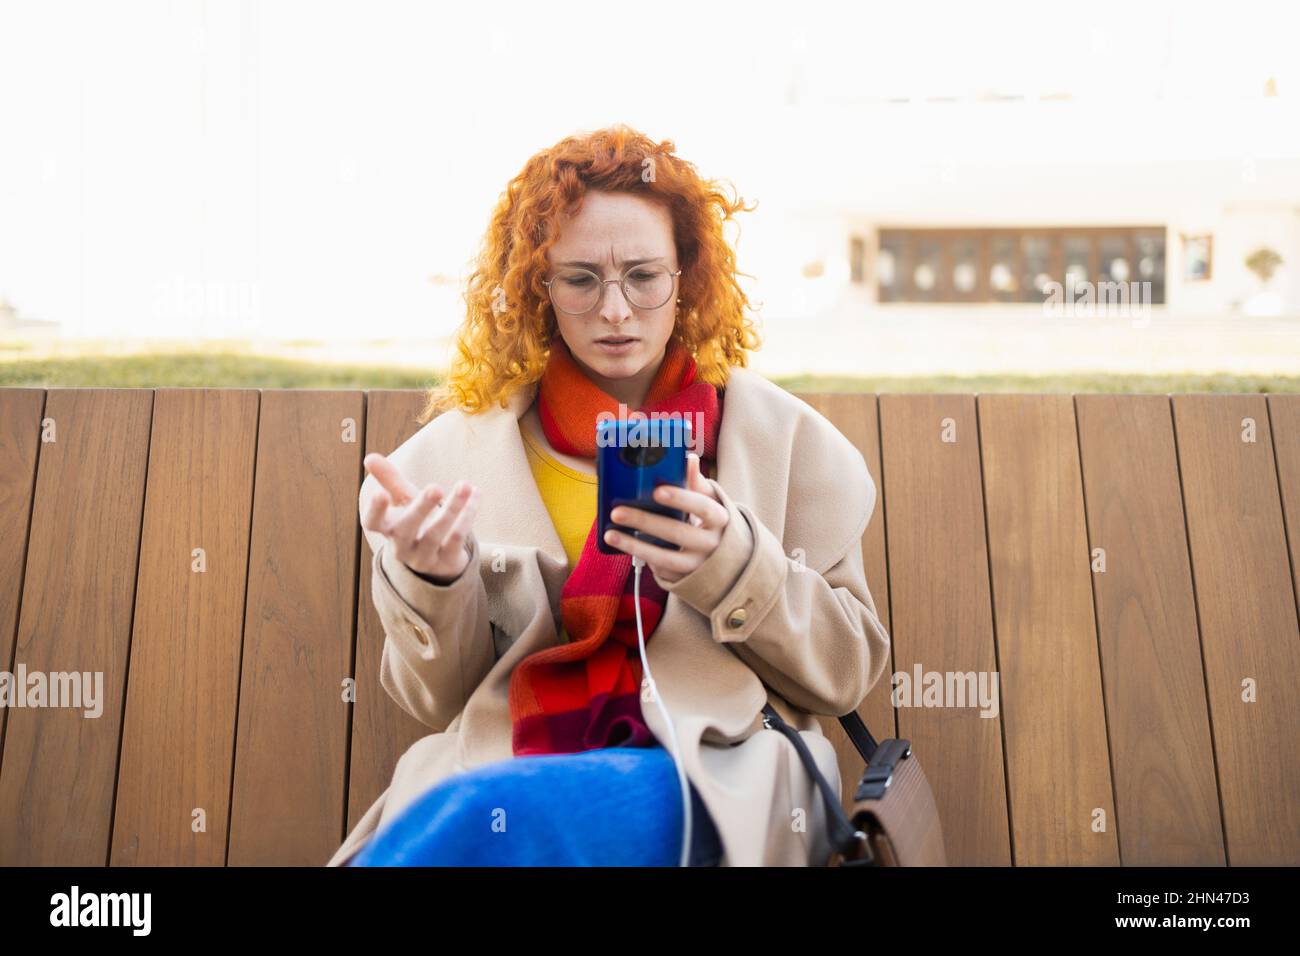 Concerned young woman reading some disturbing news on her smartphone Stock Photo